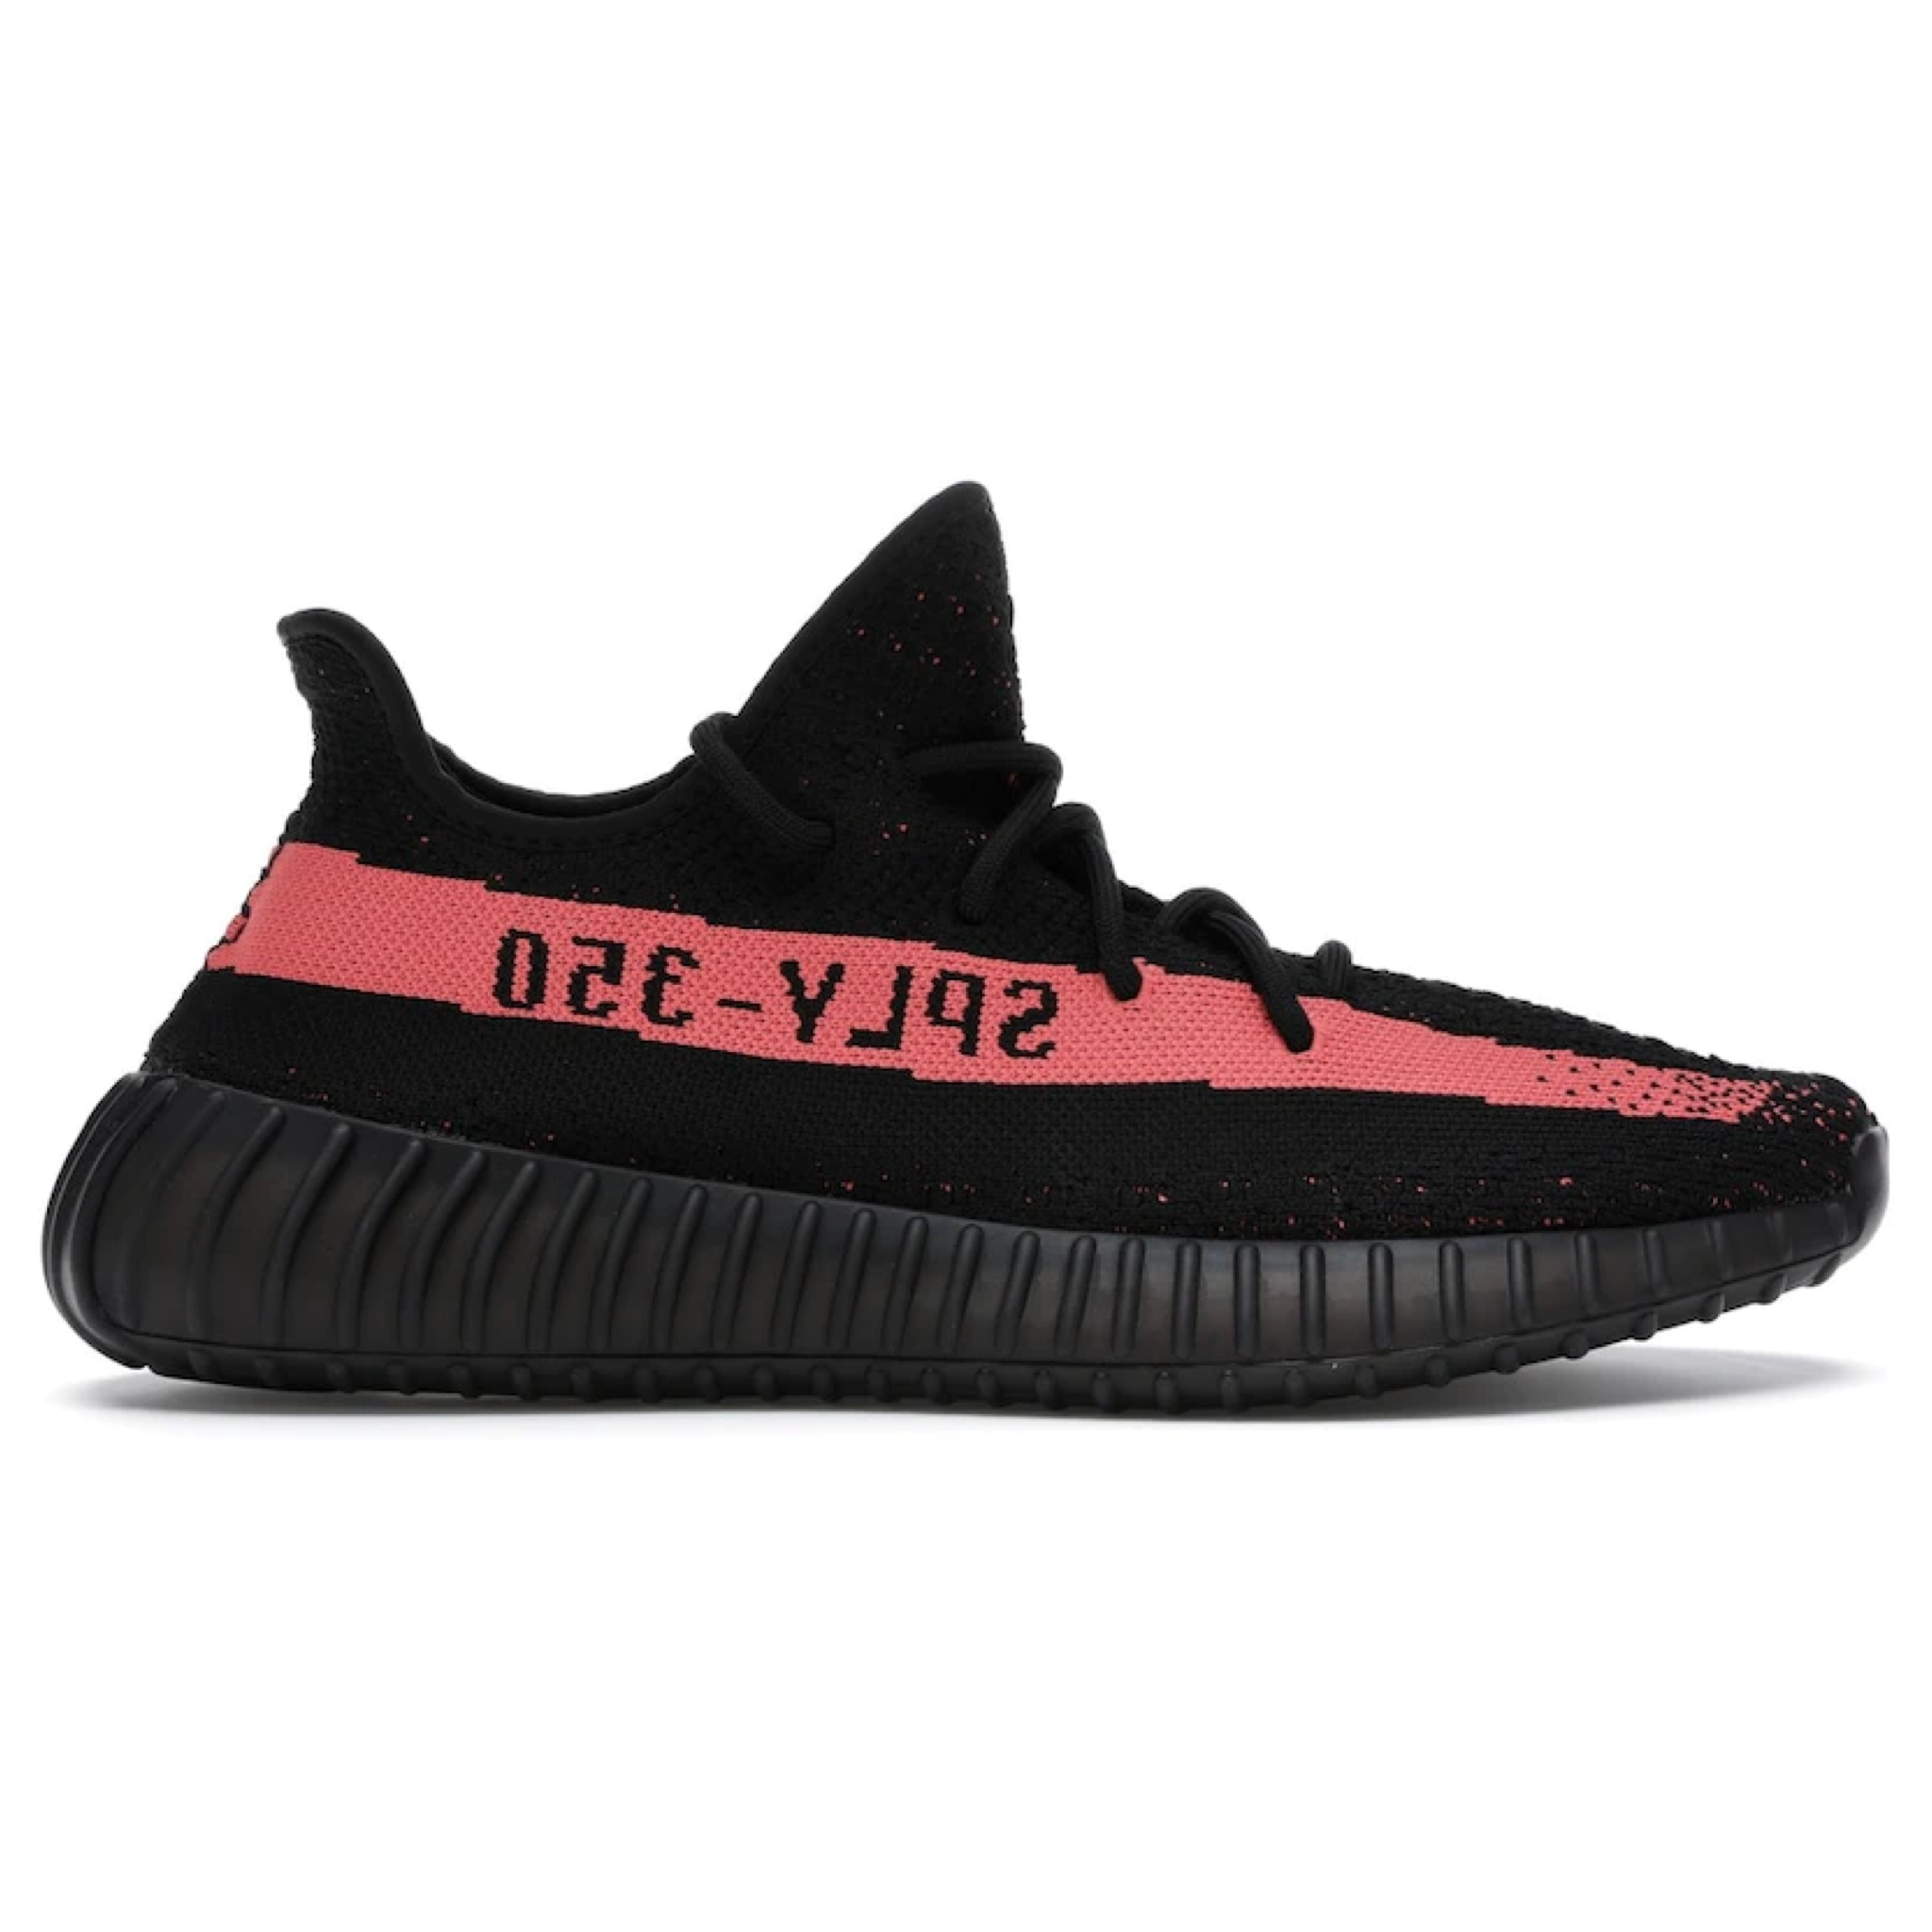 ADIDAS YEEZY BOOST 350 V2 "CORE BLACK RED" (BY9612) – CONCEPTSTOREHK